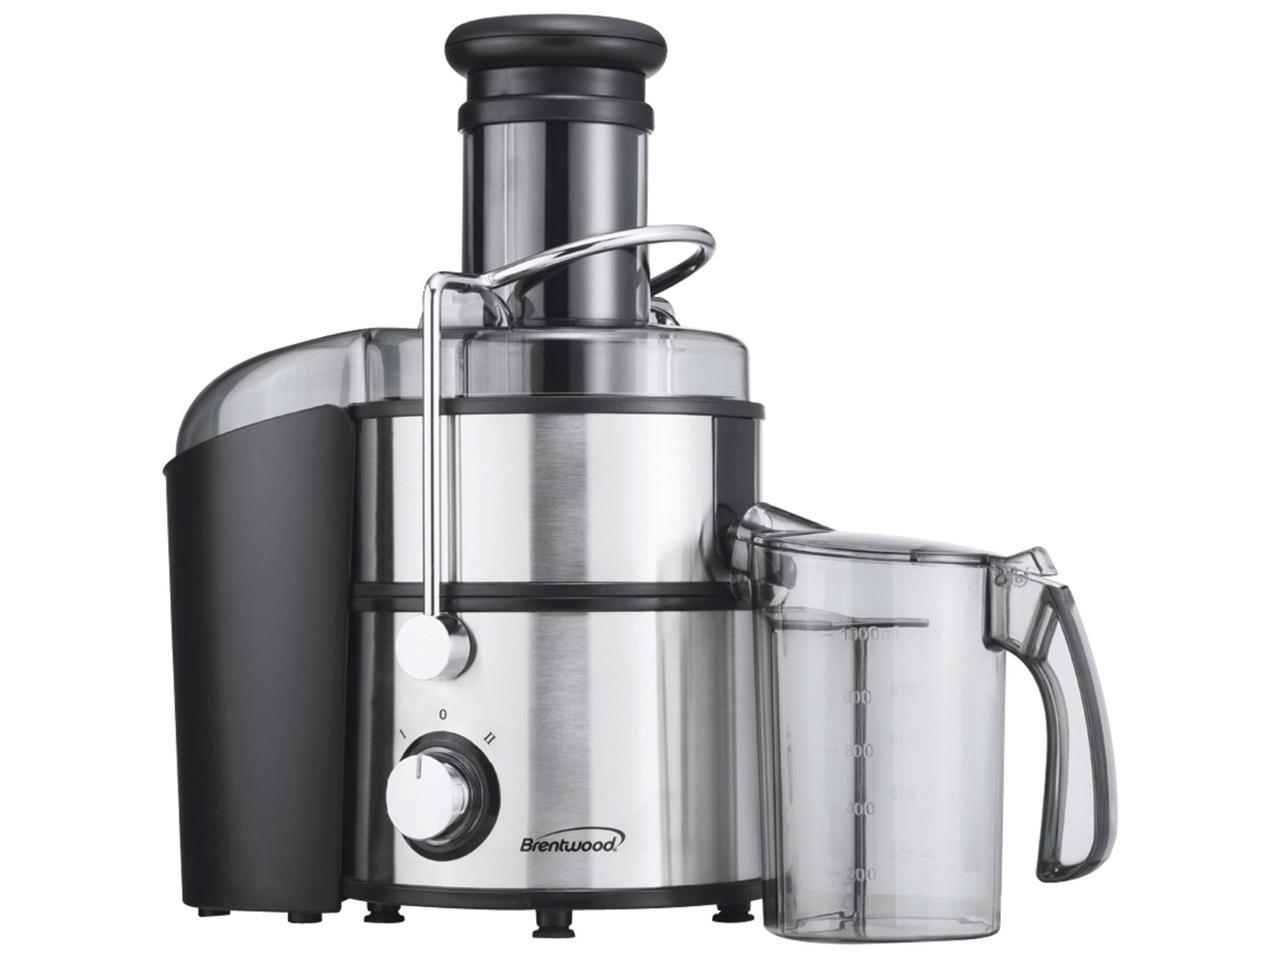 Brentwood Appliances JC-500 2-Speed 800Watt Juice Extractor with Graduated Jar, Stainless Steel - image 3 of 5